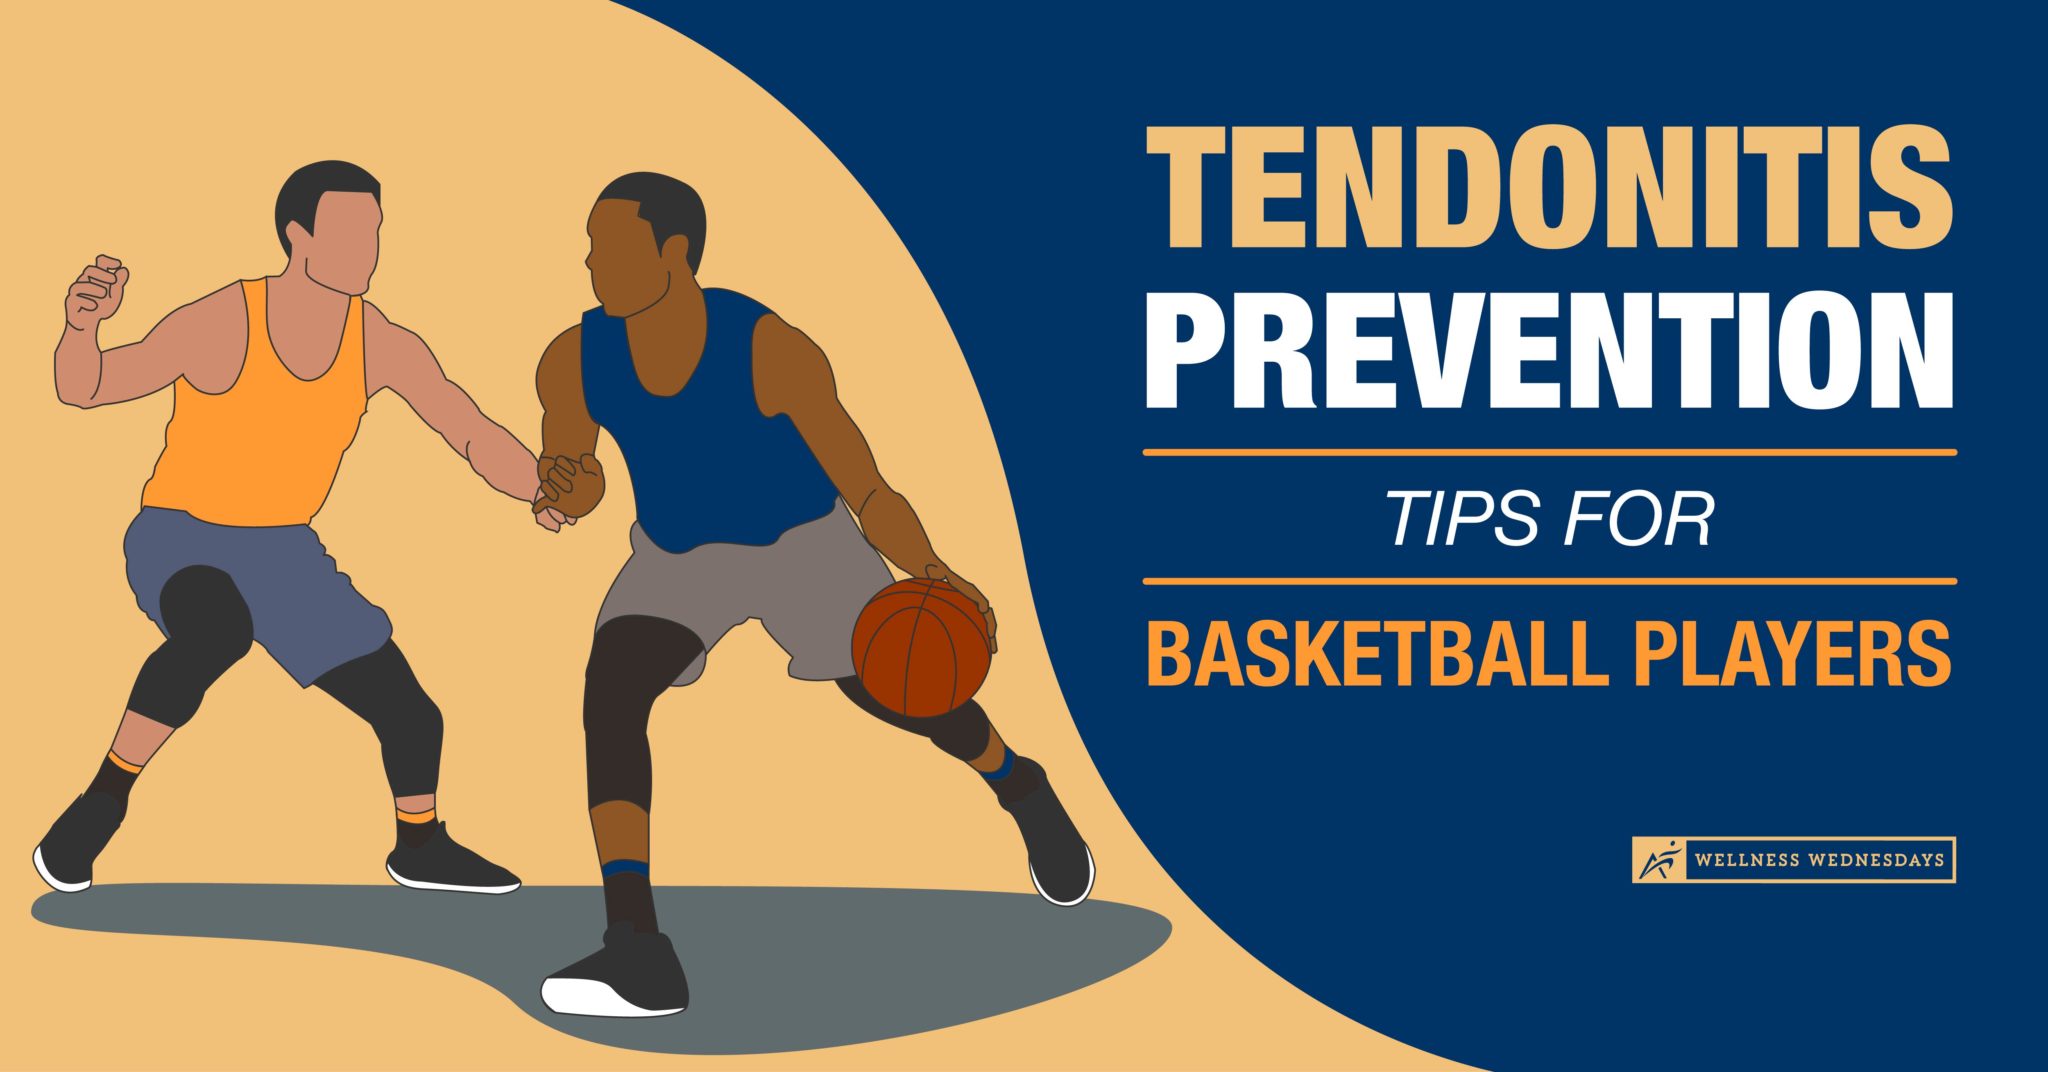 2021_09_Tendonitis Prevention Tips for Basketball Players_361821